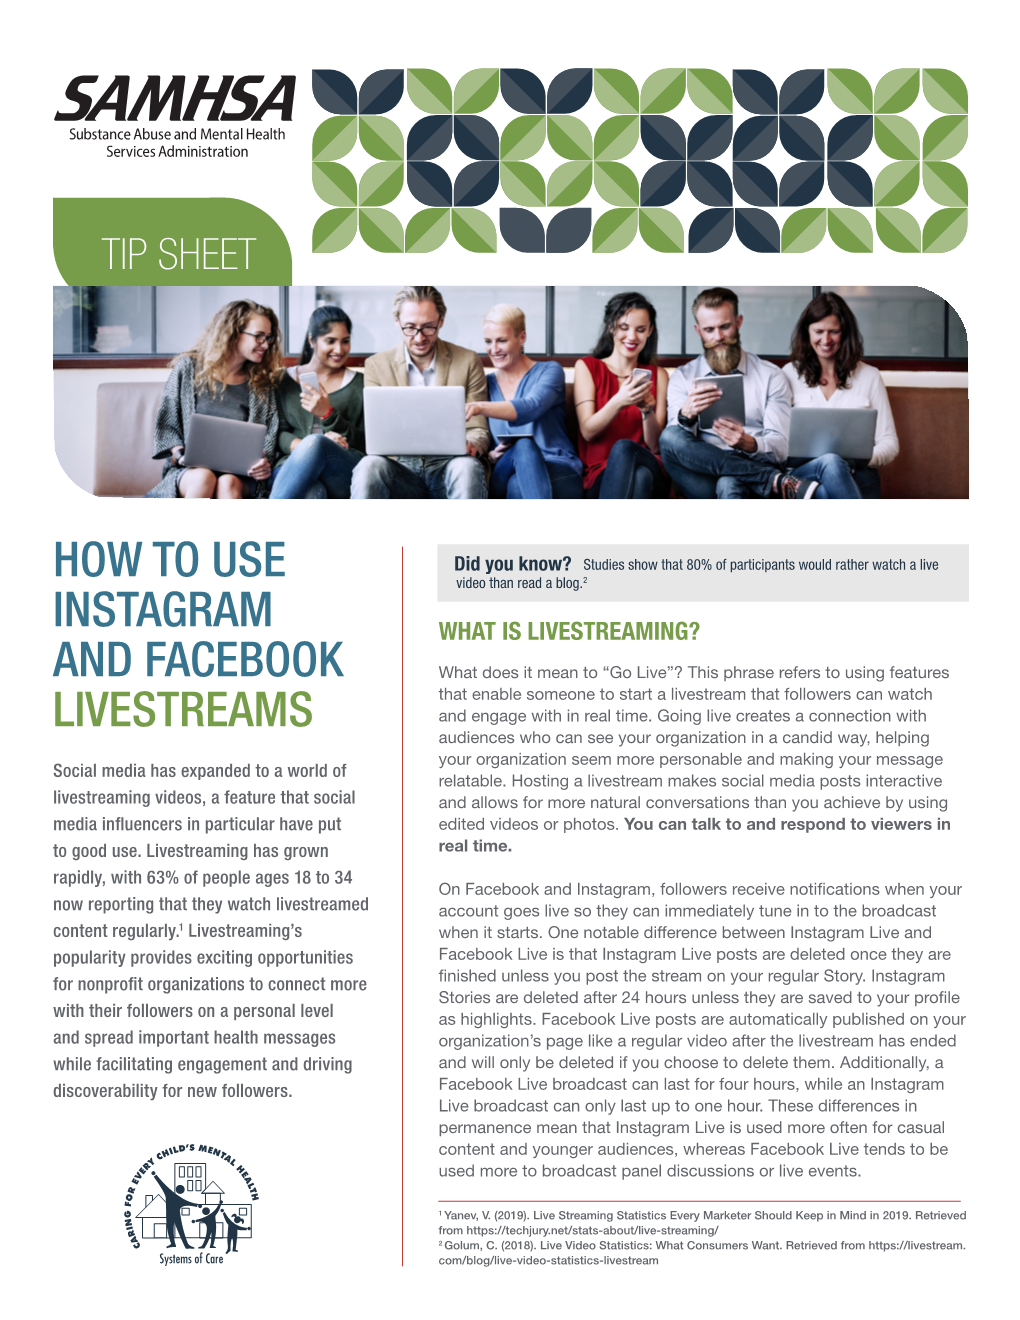 Tip Sheet: How to Use Instagram and Facebook Livestreams